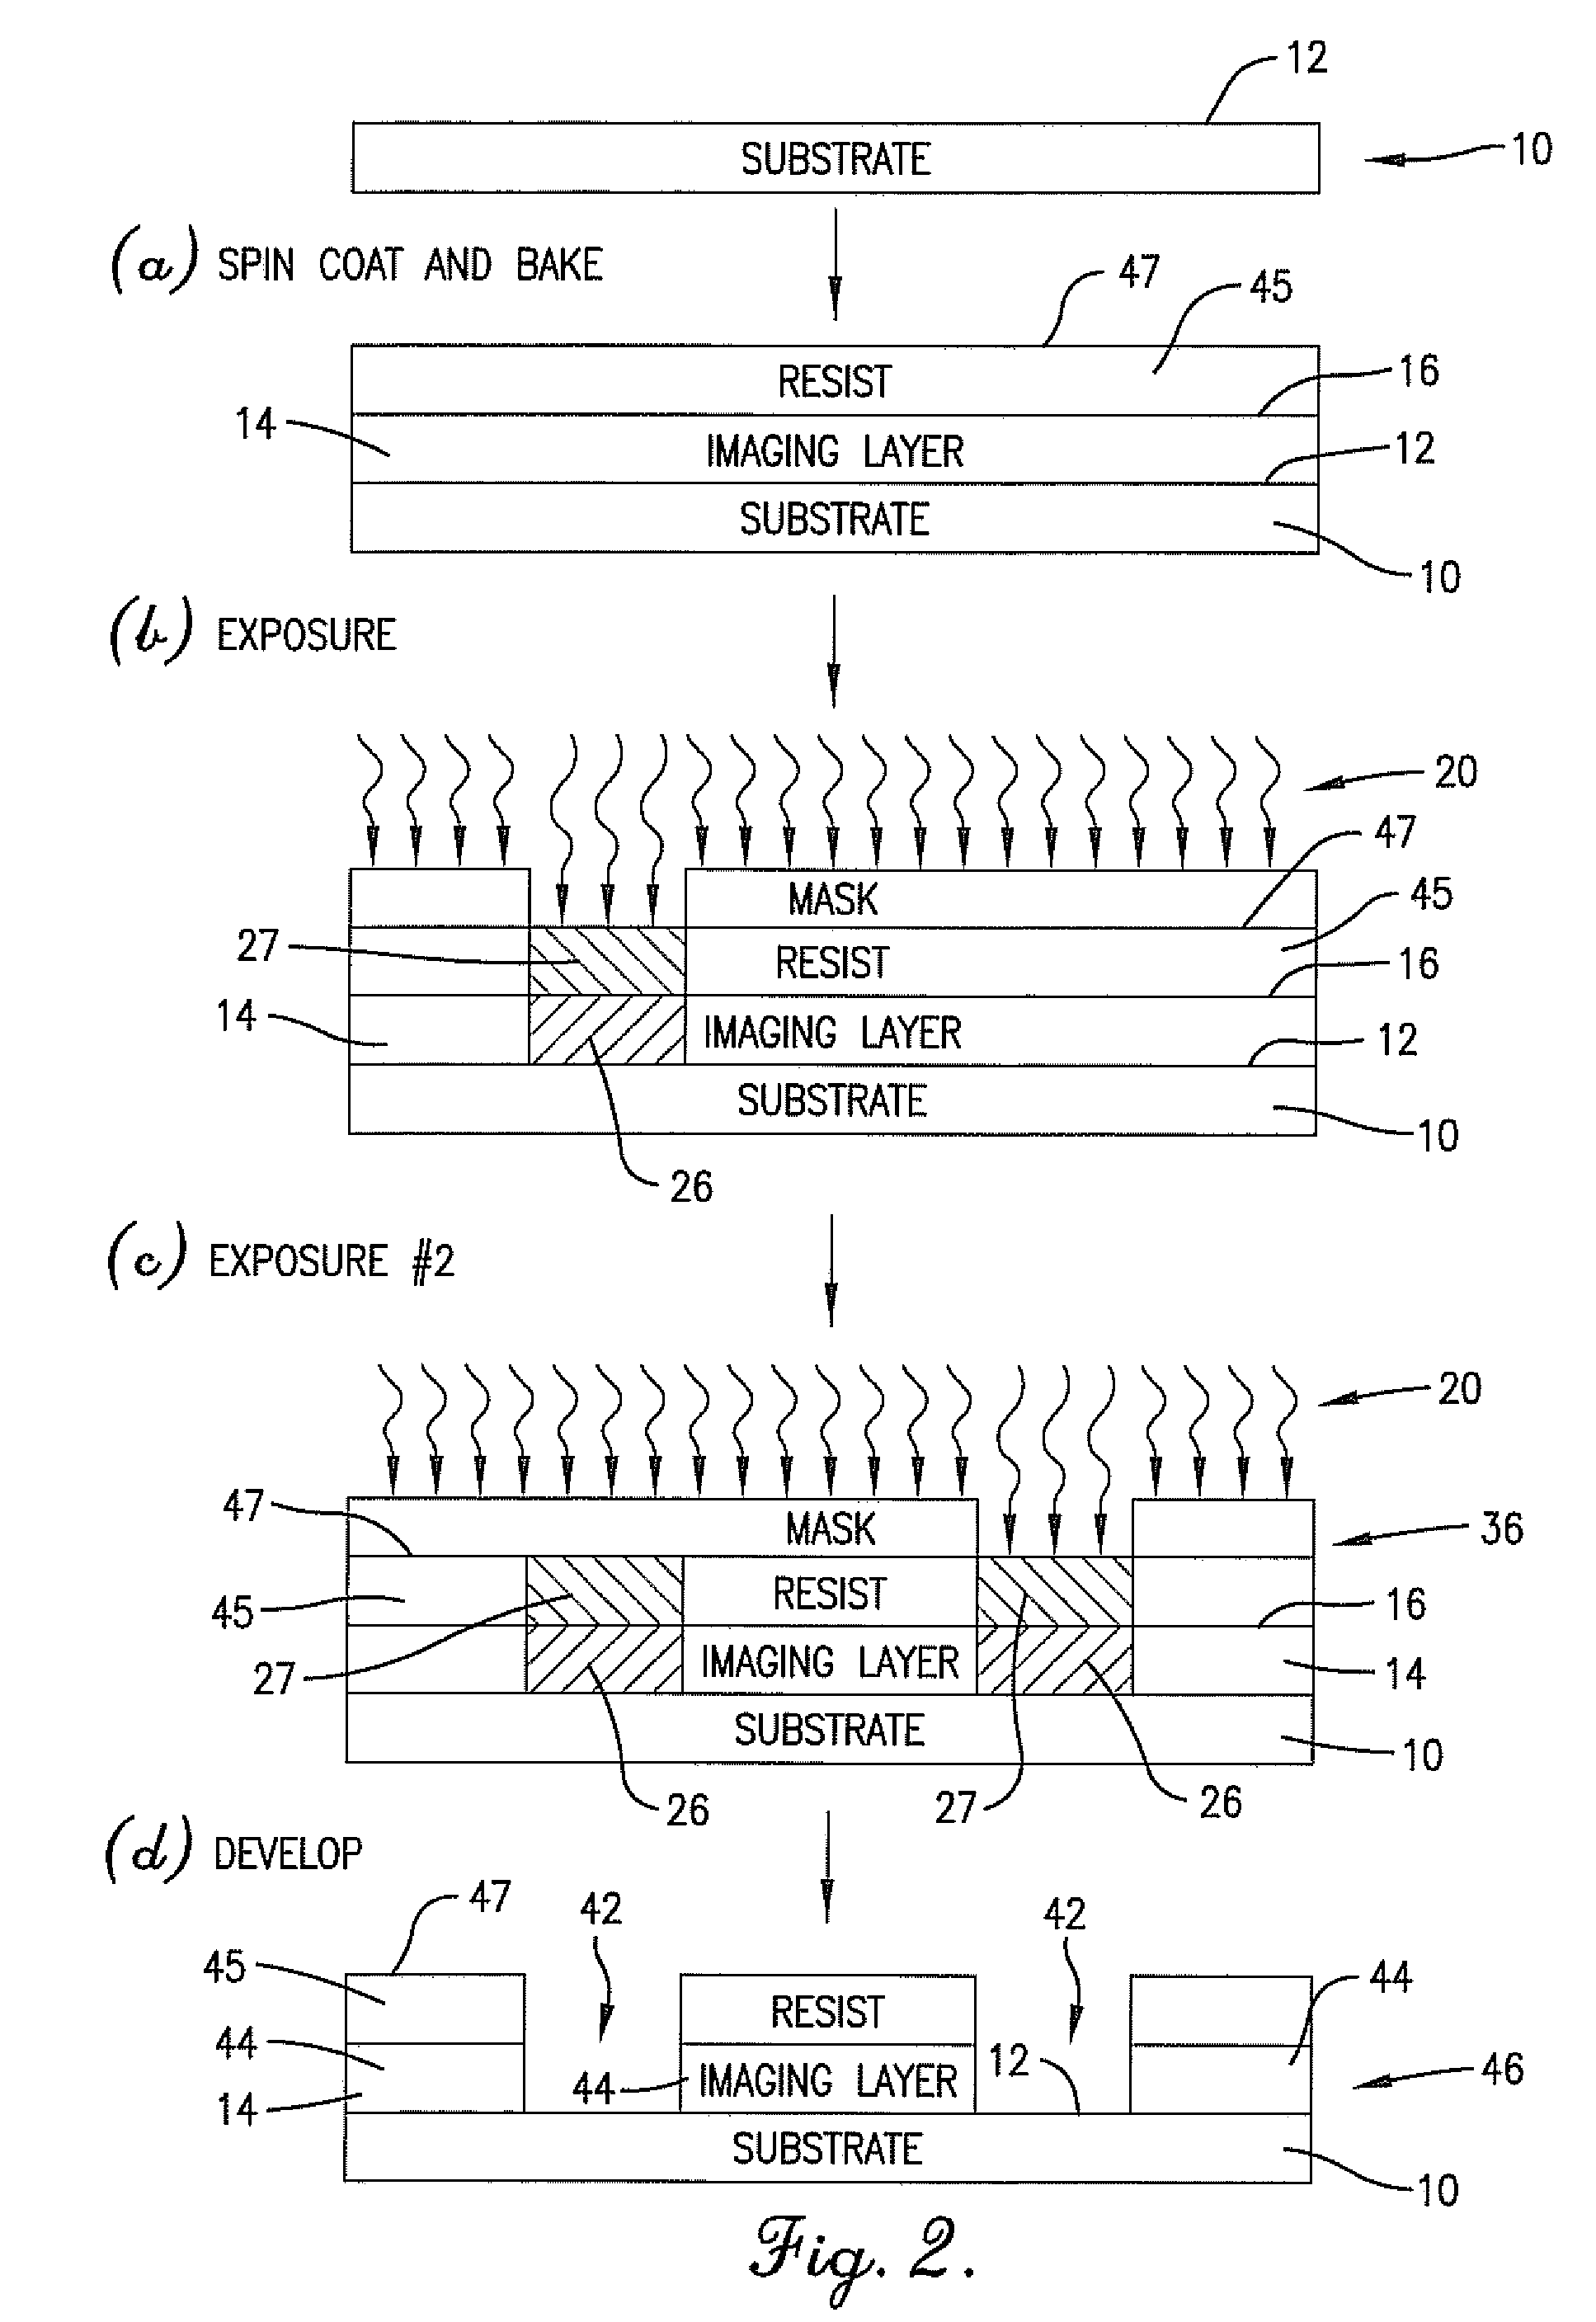 Anti-reflective imaging layer for multiple patterning process